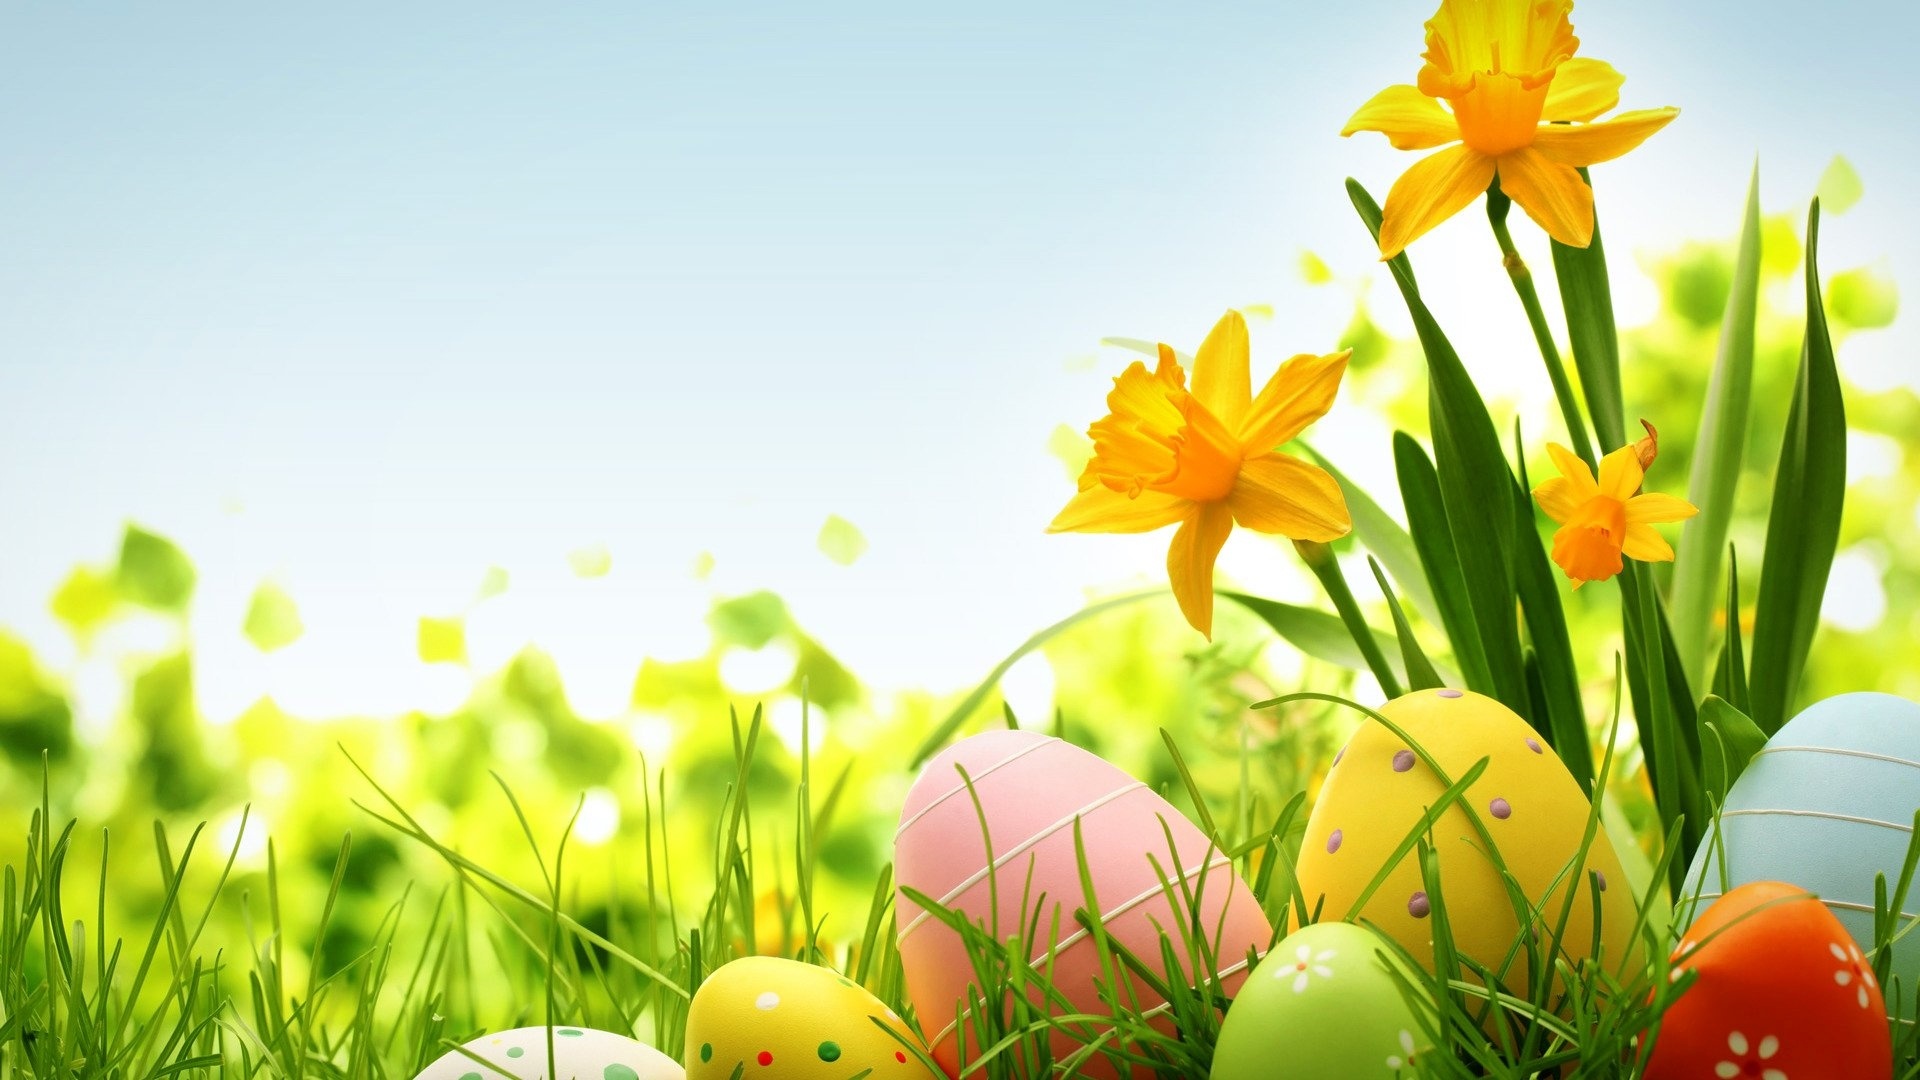 Background For Easter Card Image